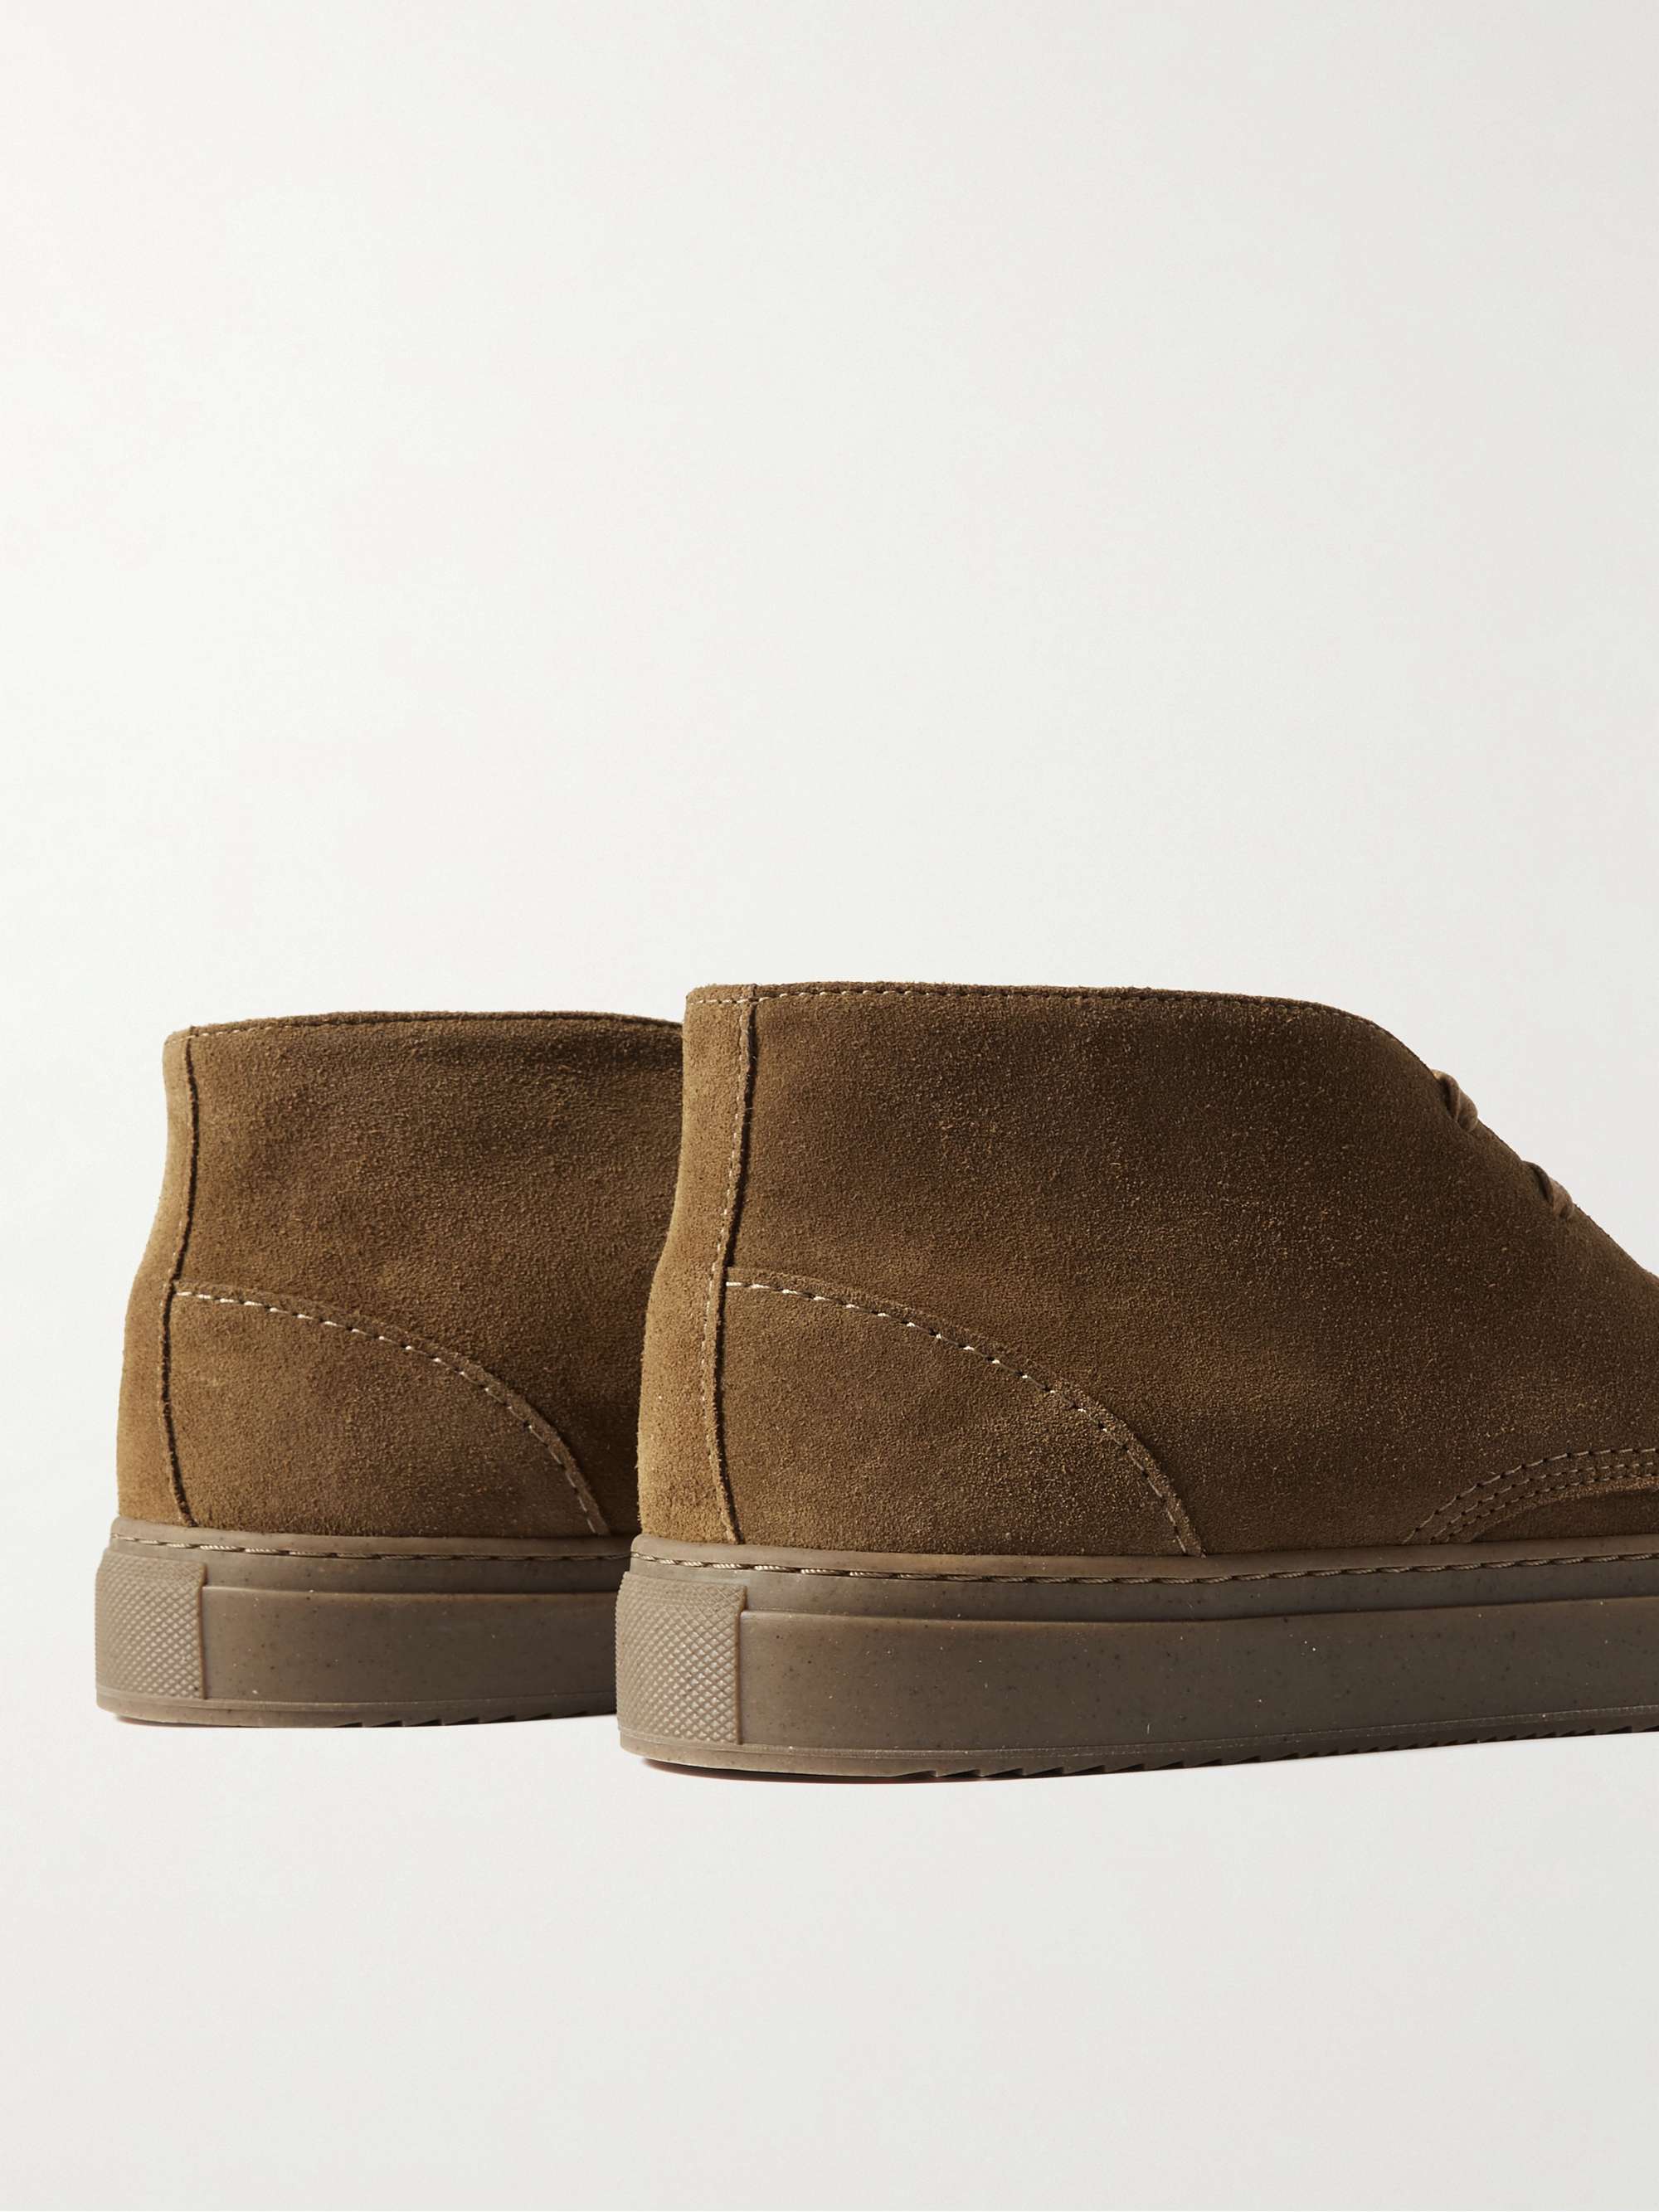 MR P. Larry Split-Toe Regenerated Suede by evolo® Chukka Boots